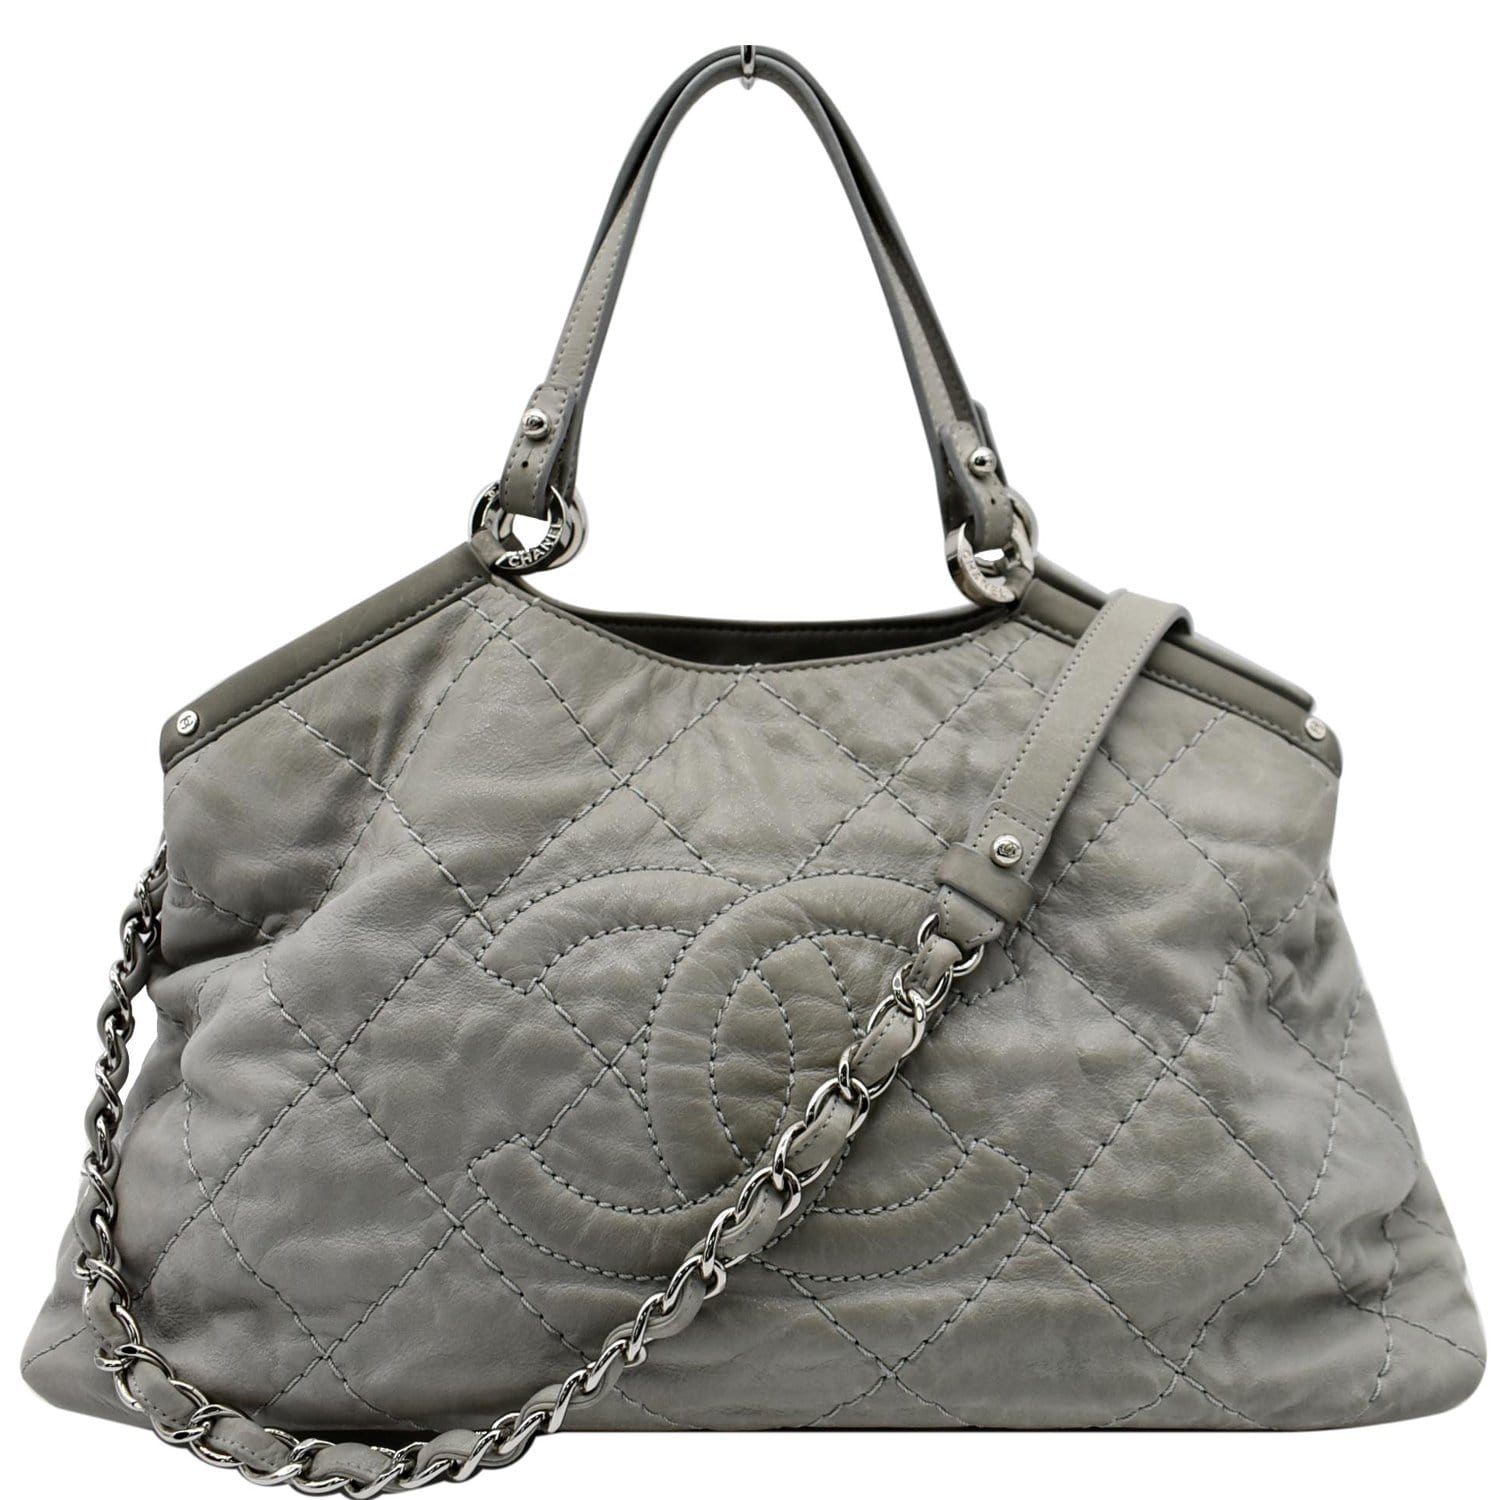 Buy Chanel Wild Stitch Black Hobo Bag | Exclusive Sale | REDELUXE Luxury Pre-owned Handbags